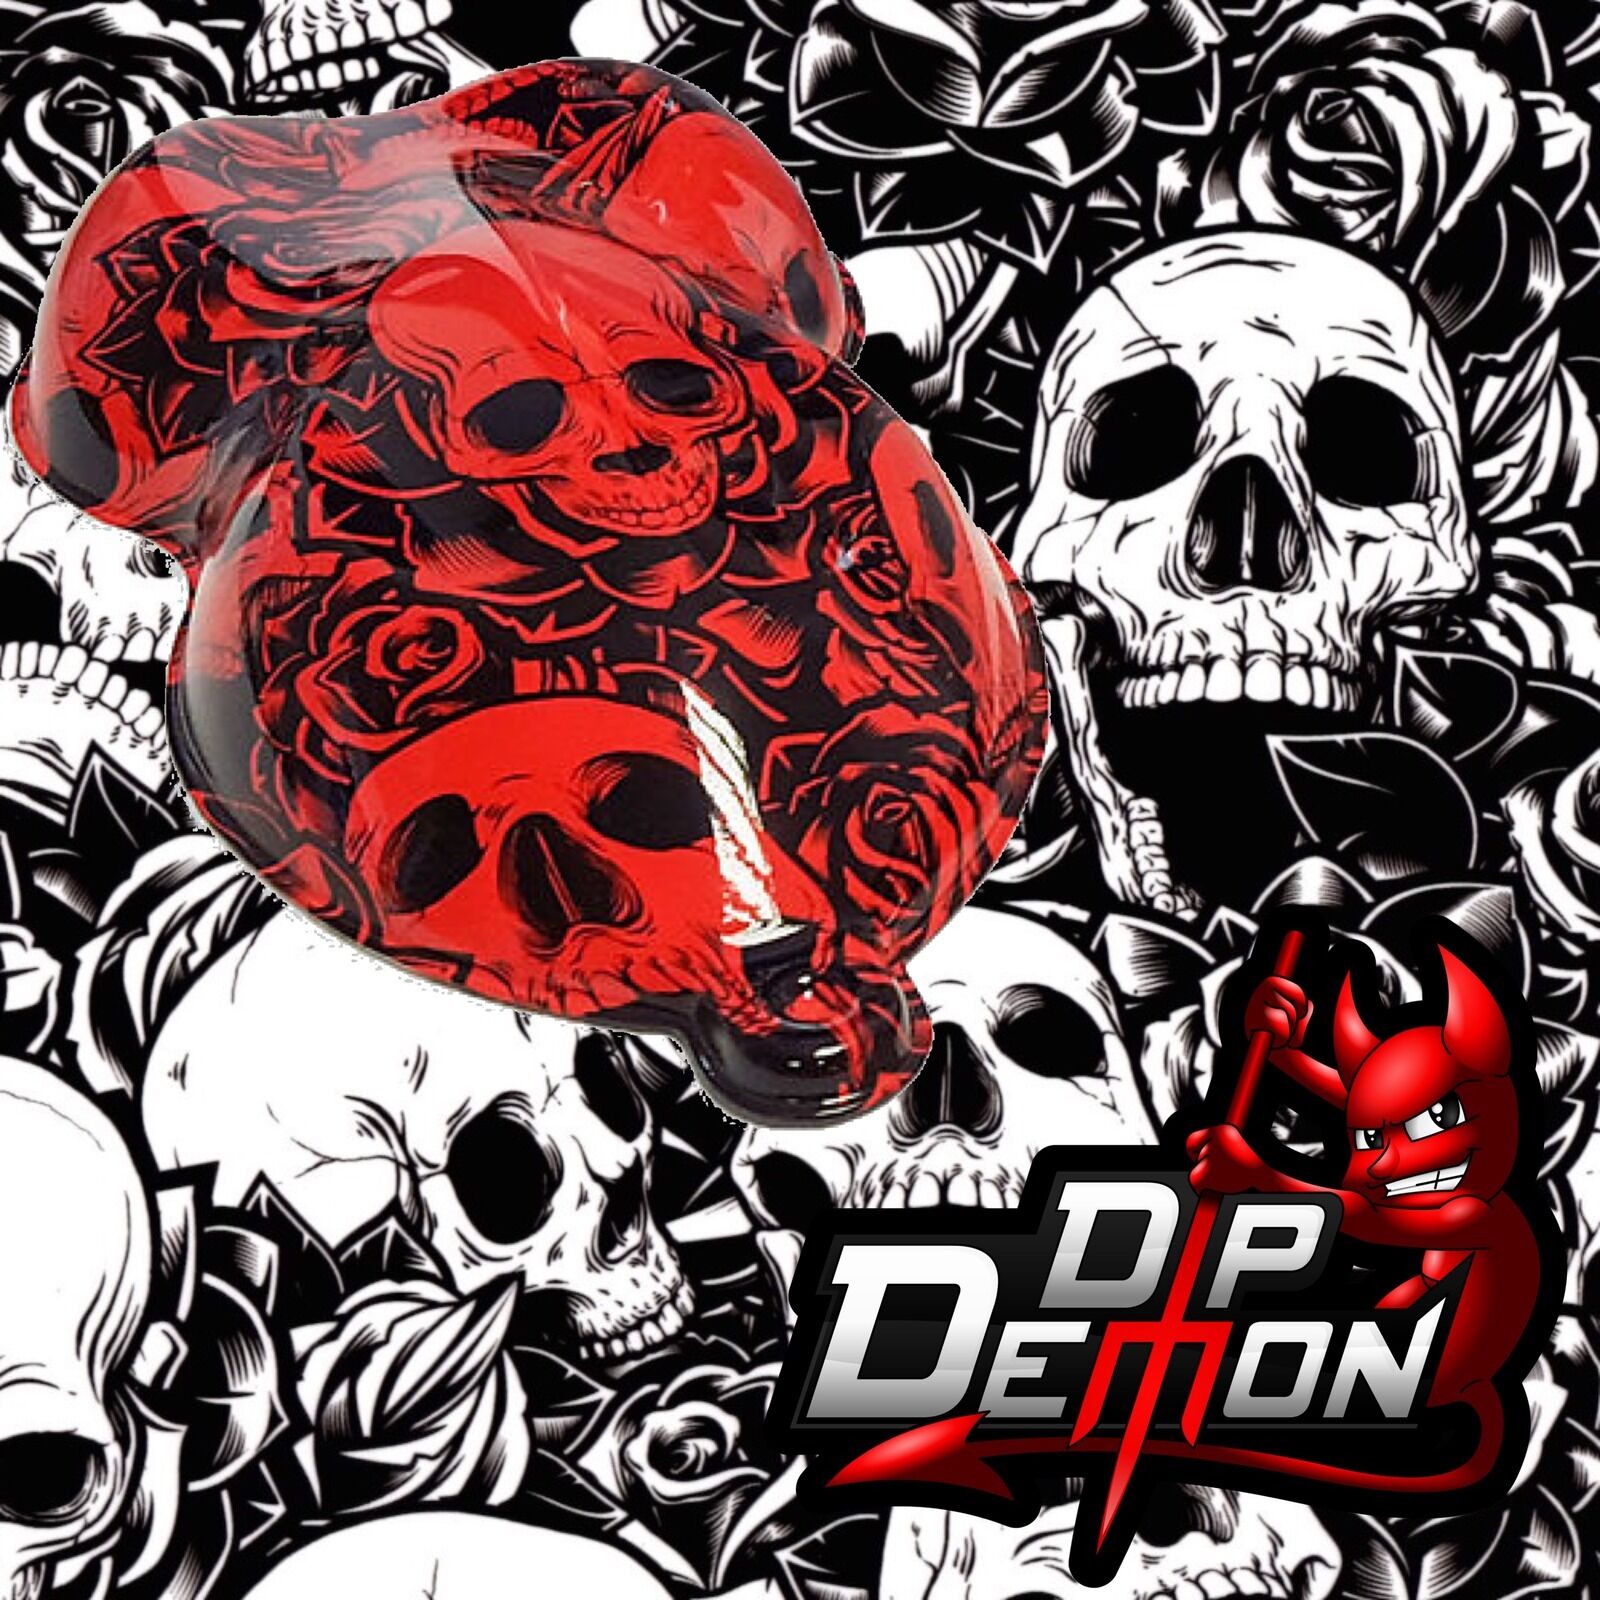 HYDROGRAPHIC FILM SKULLS AND ROSES TRANSPARENT WATER TRANSFER  HYDRO DIPPING